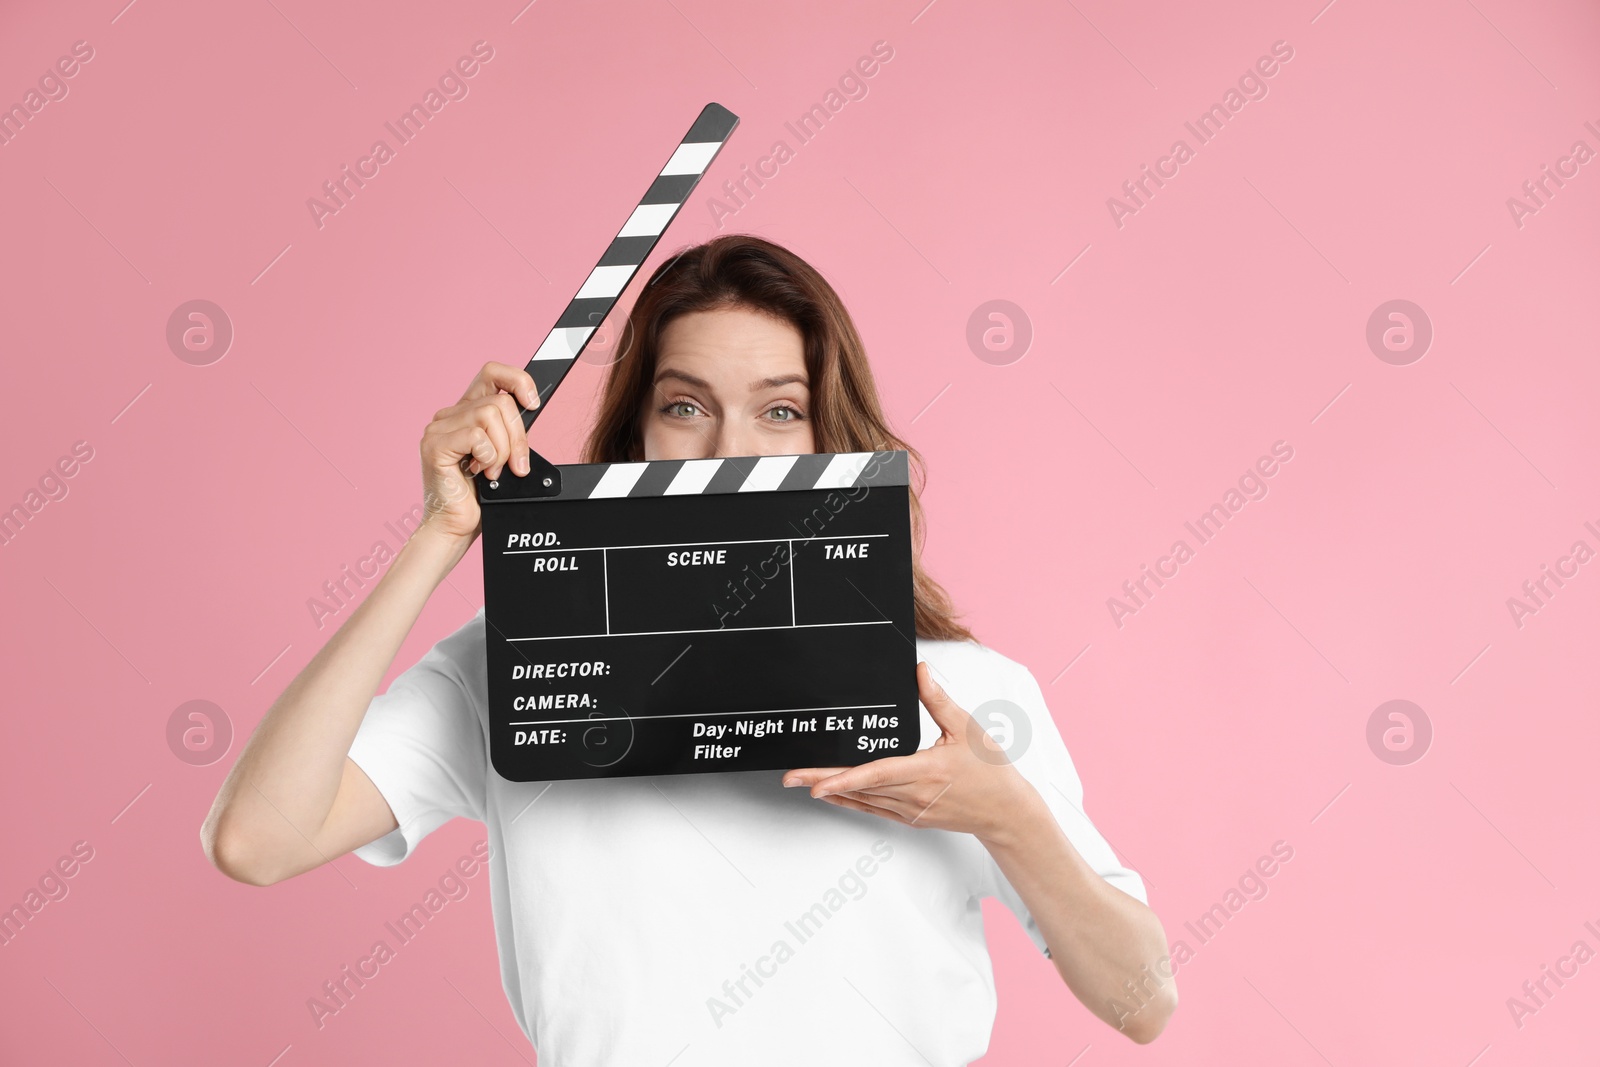 Photo of Making movie. Woman with clapperboard on pink background